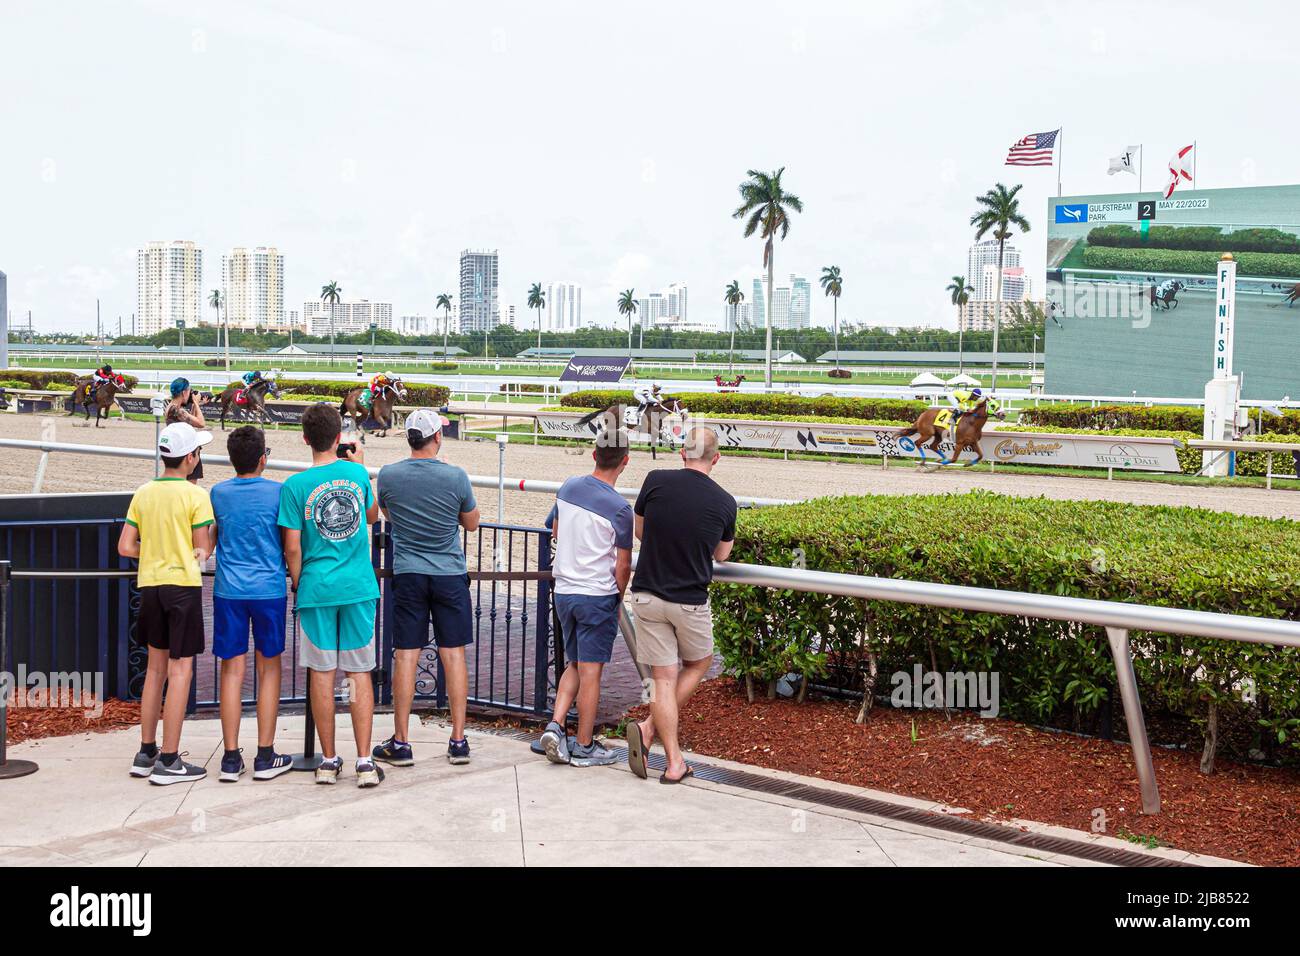 Hallandale Florida Miami,Gulfstream Park racetrack racecourse thoroughbred horse racing track,fans watching race finish line boys men family friends Stock Photo